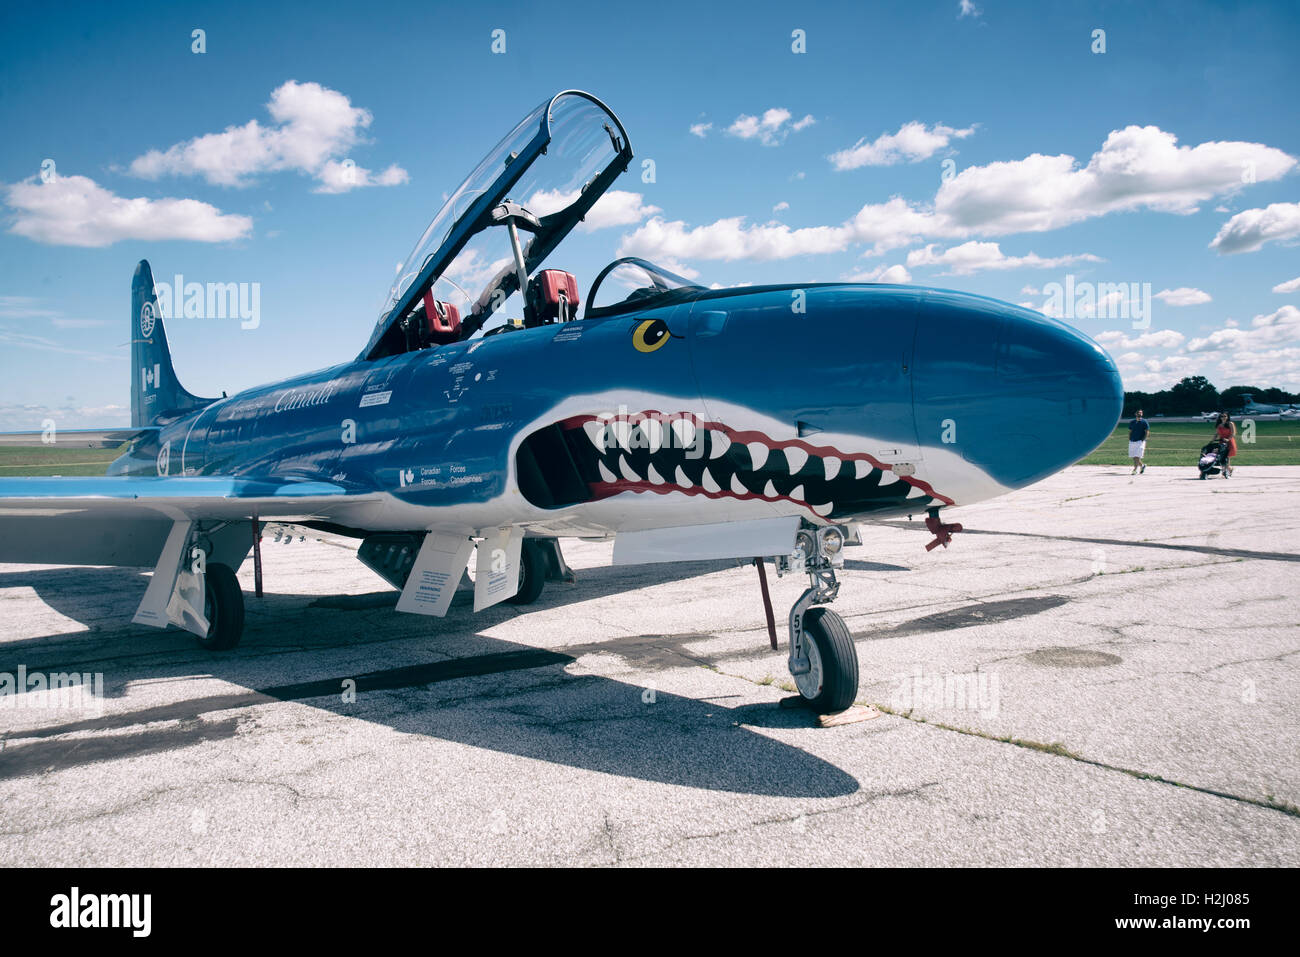 WINDSOR, CANADA - SEPT 10, 2016: Jet Aircraft Museum (JAM) T-33 Silver Star Jet Trainer painted as the “Mako Shark”, in exhibit Stock Photo